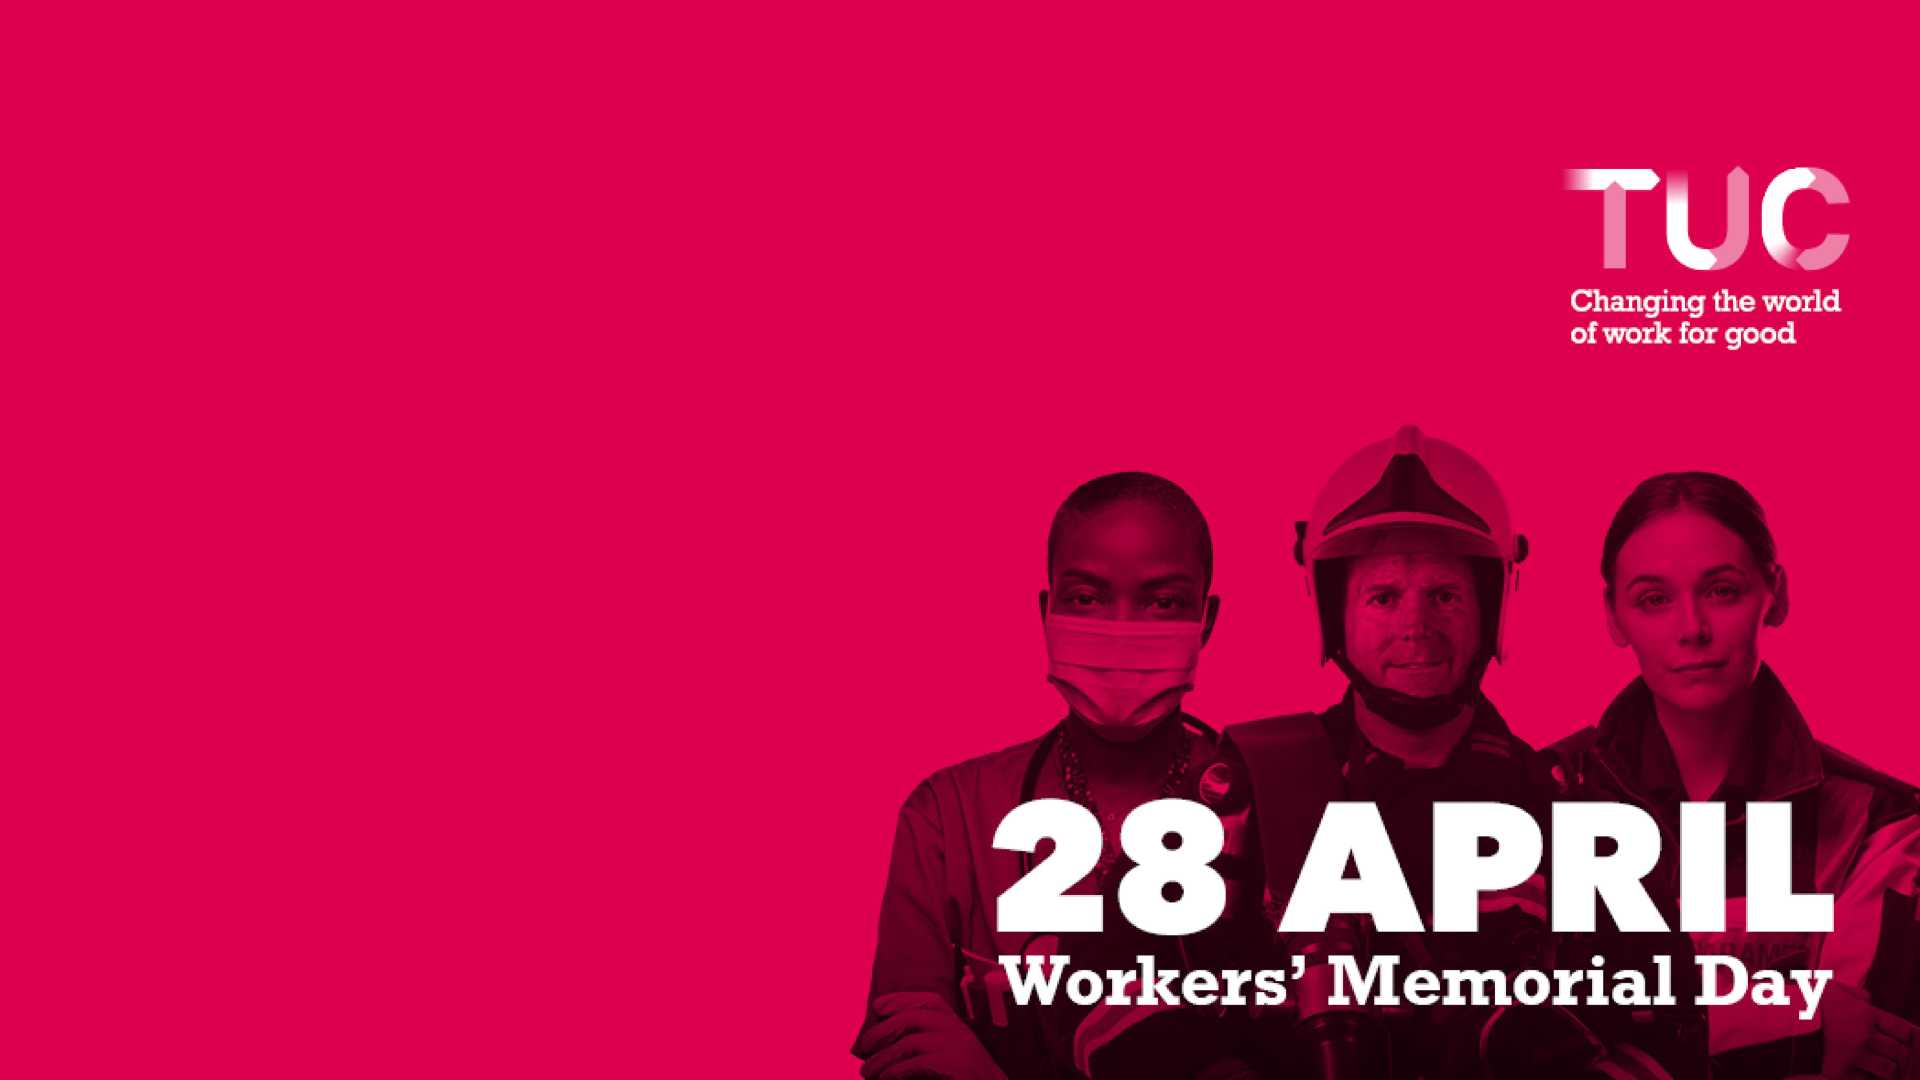 International workers memorial day 2021 on red background